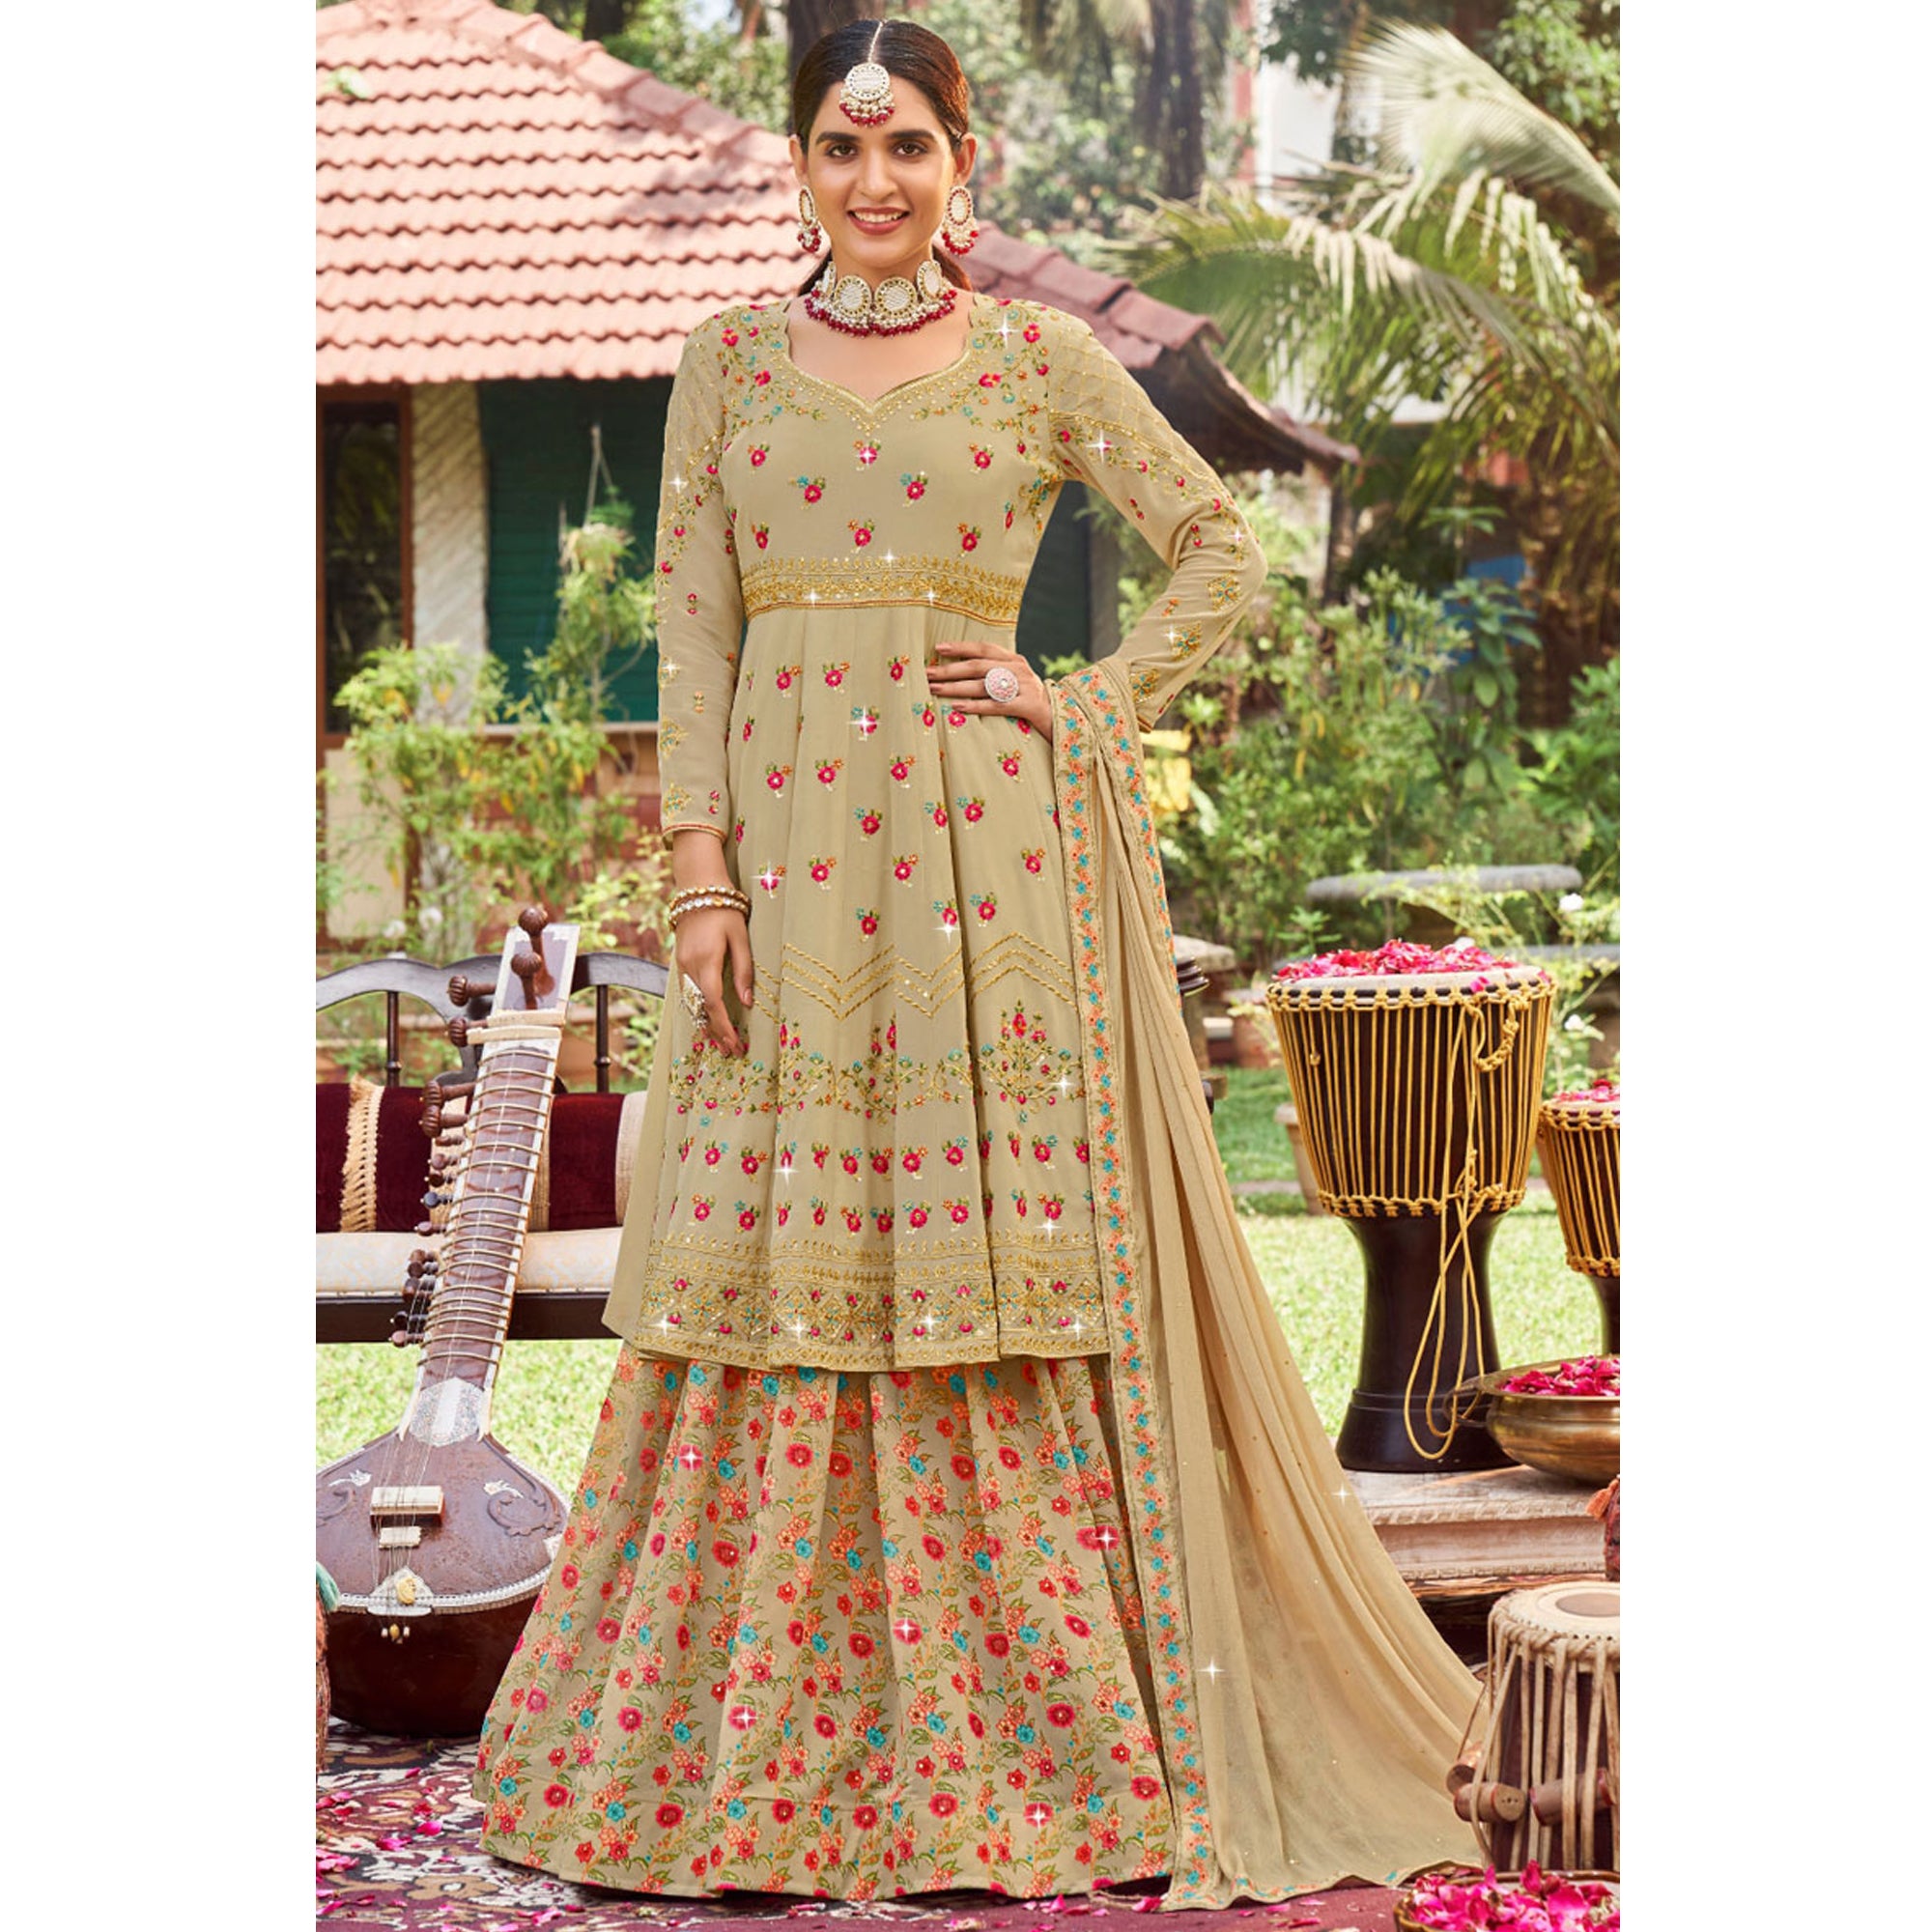 Indian Pakistani Designer Beige Color Embroidery Work With Georgette Material Sharara Top Lehenga